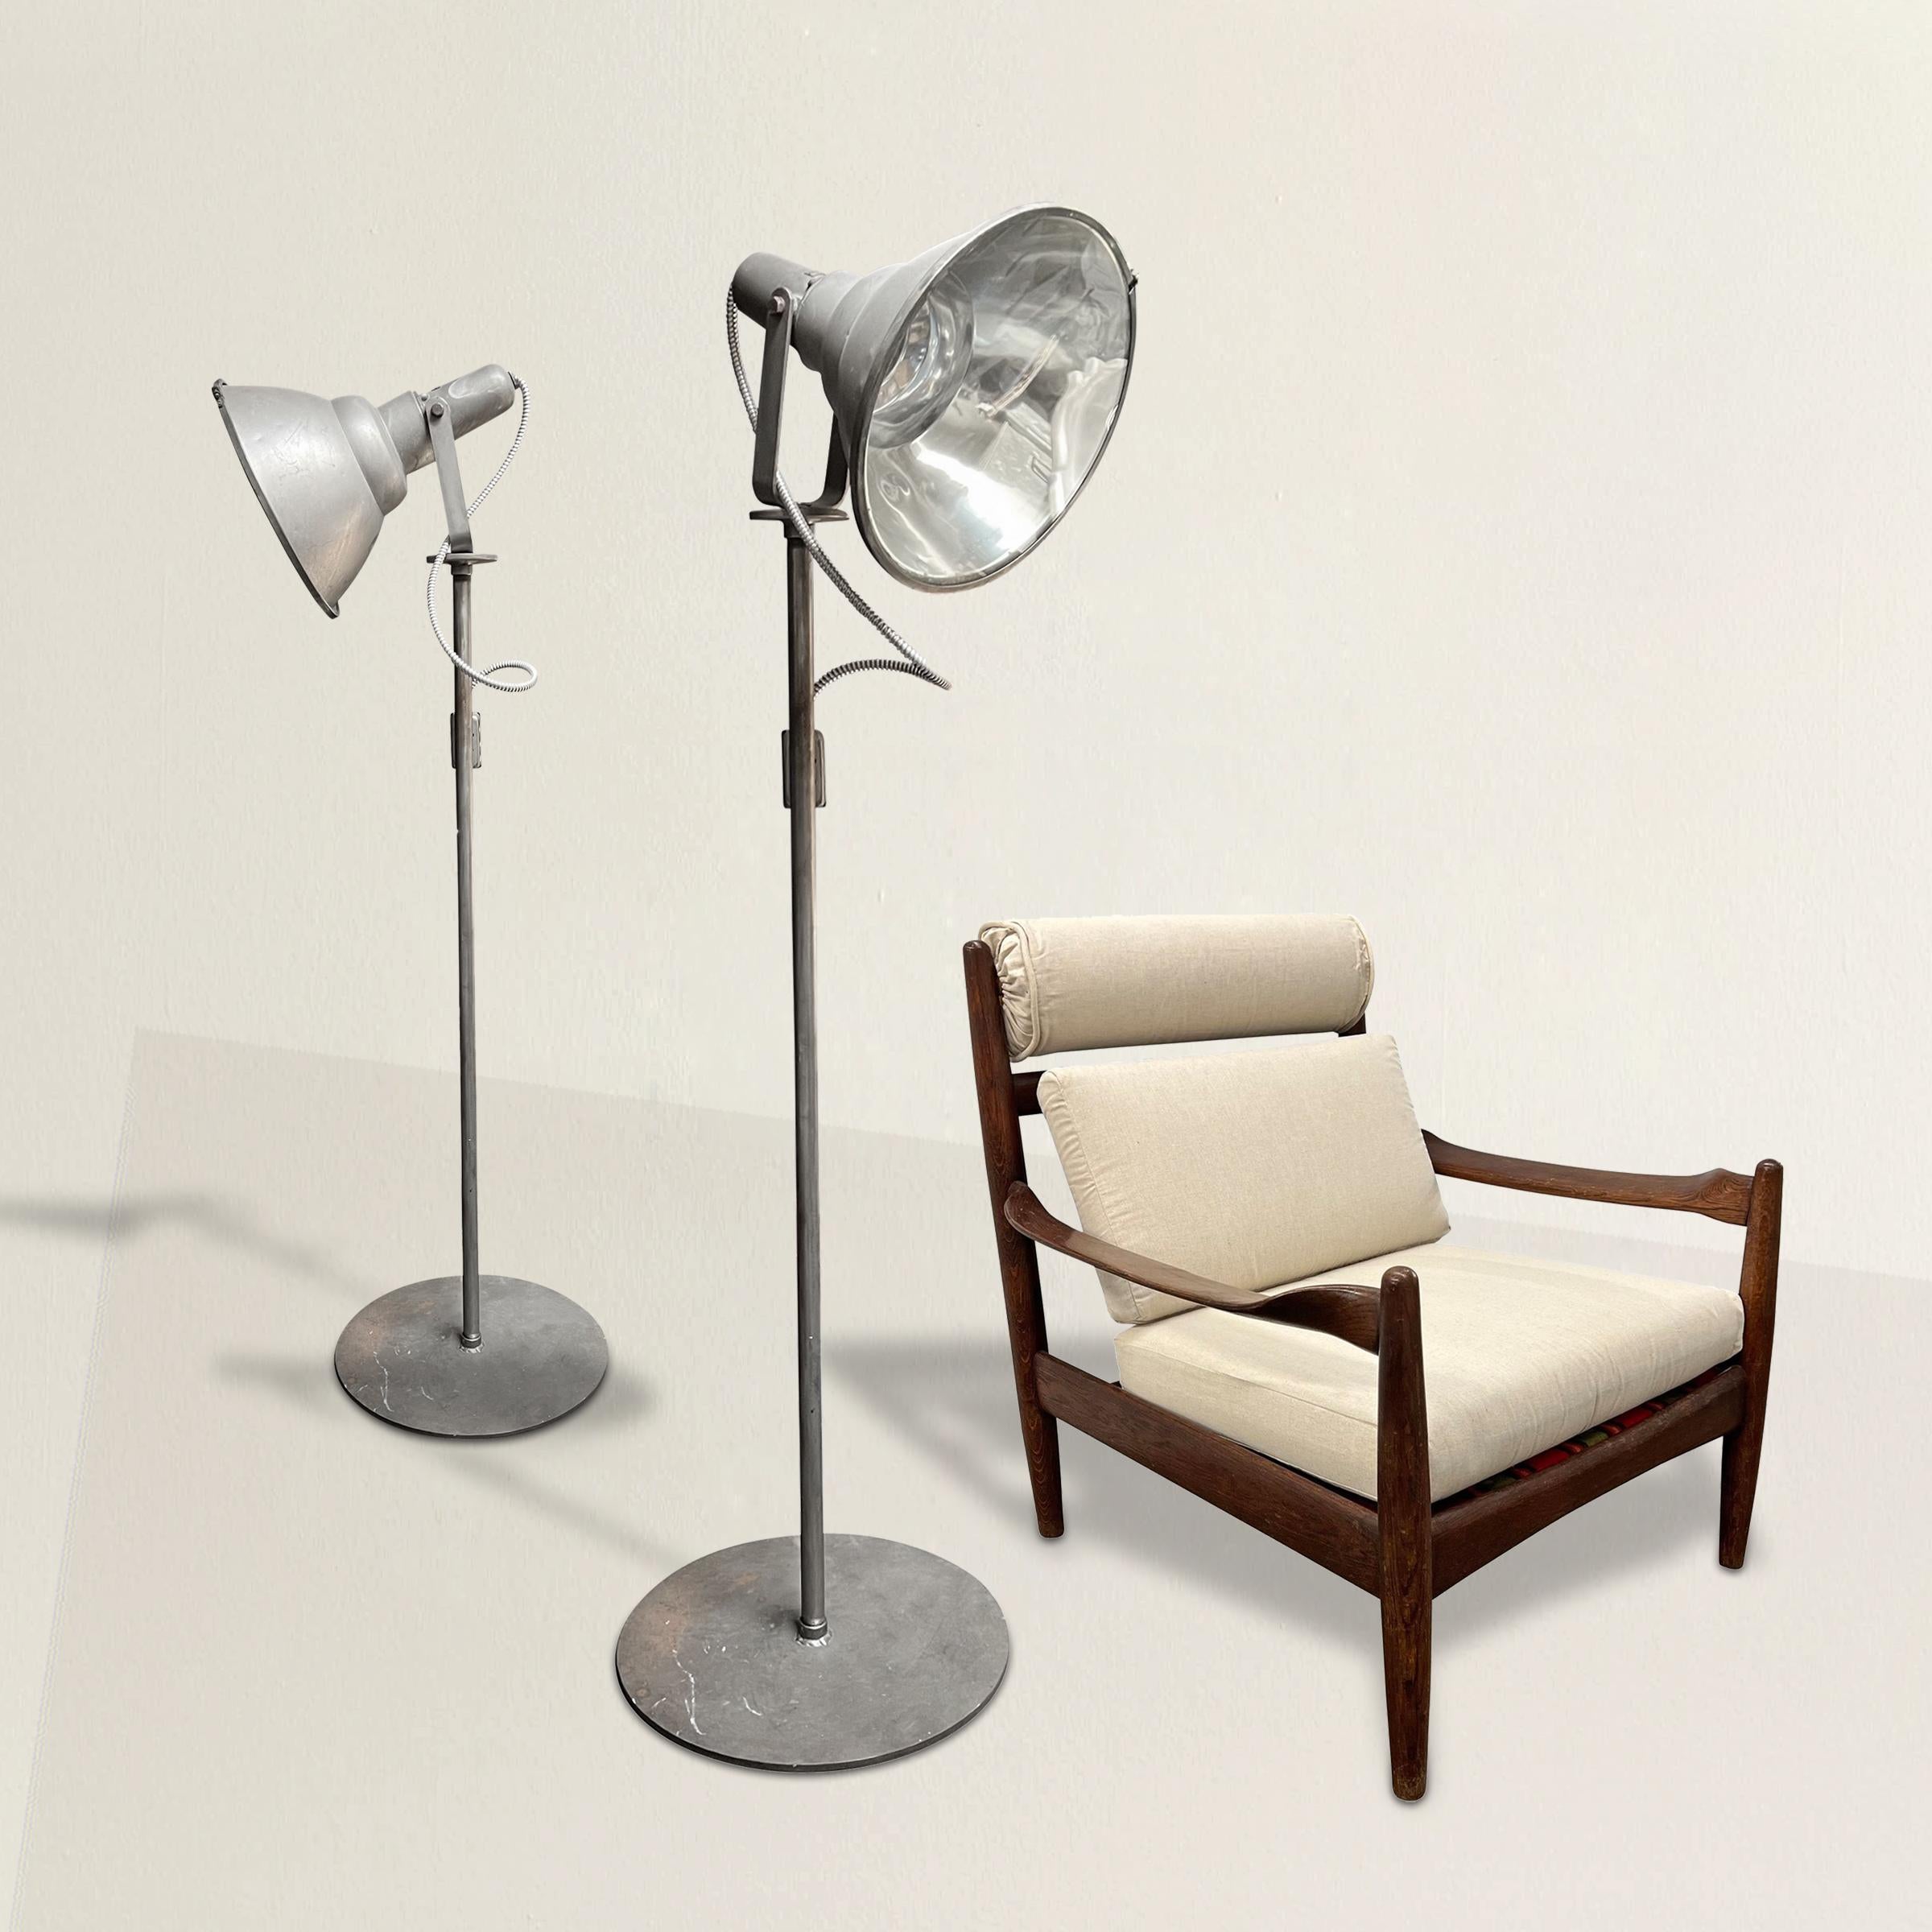 An impressive pair of 20th century American industrial oversized floor lamps with large swiveling heads mounted on steel posts with wide round bases. Newly re-wired with dimmer switches for residential use. The perfect lamps for your city loft